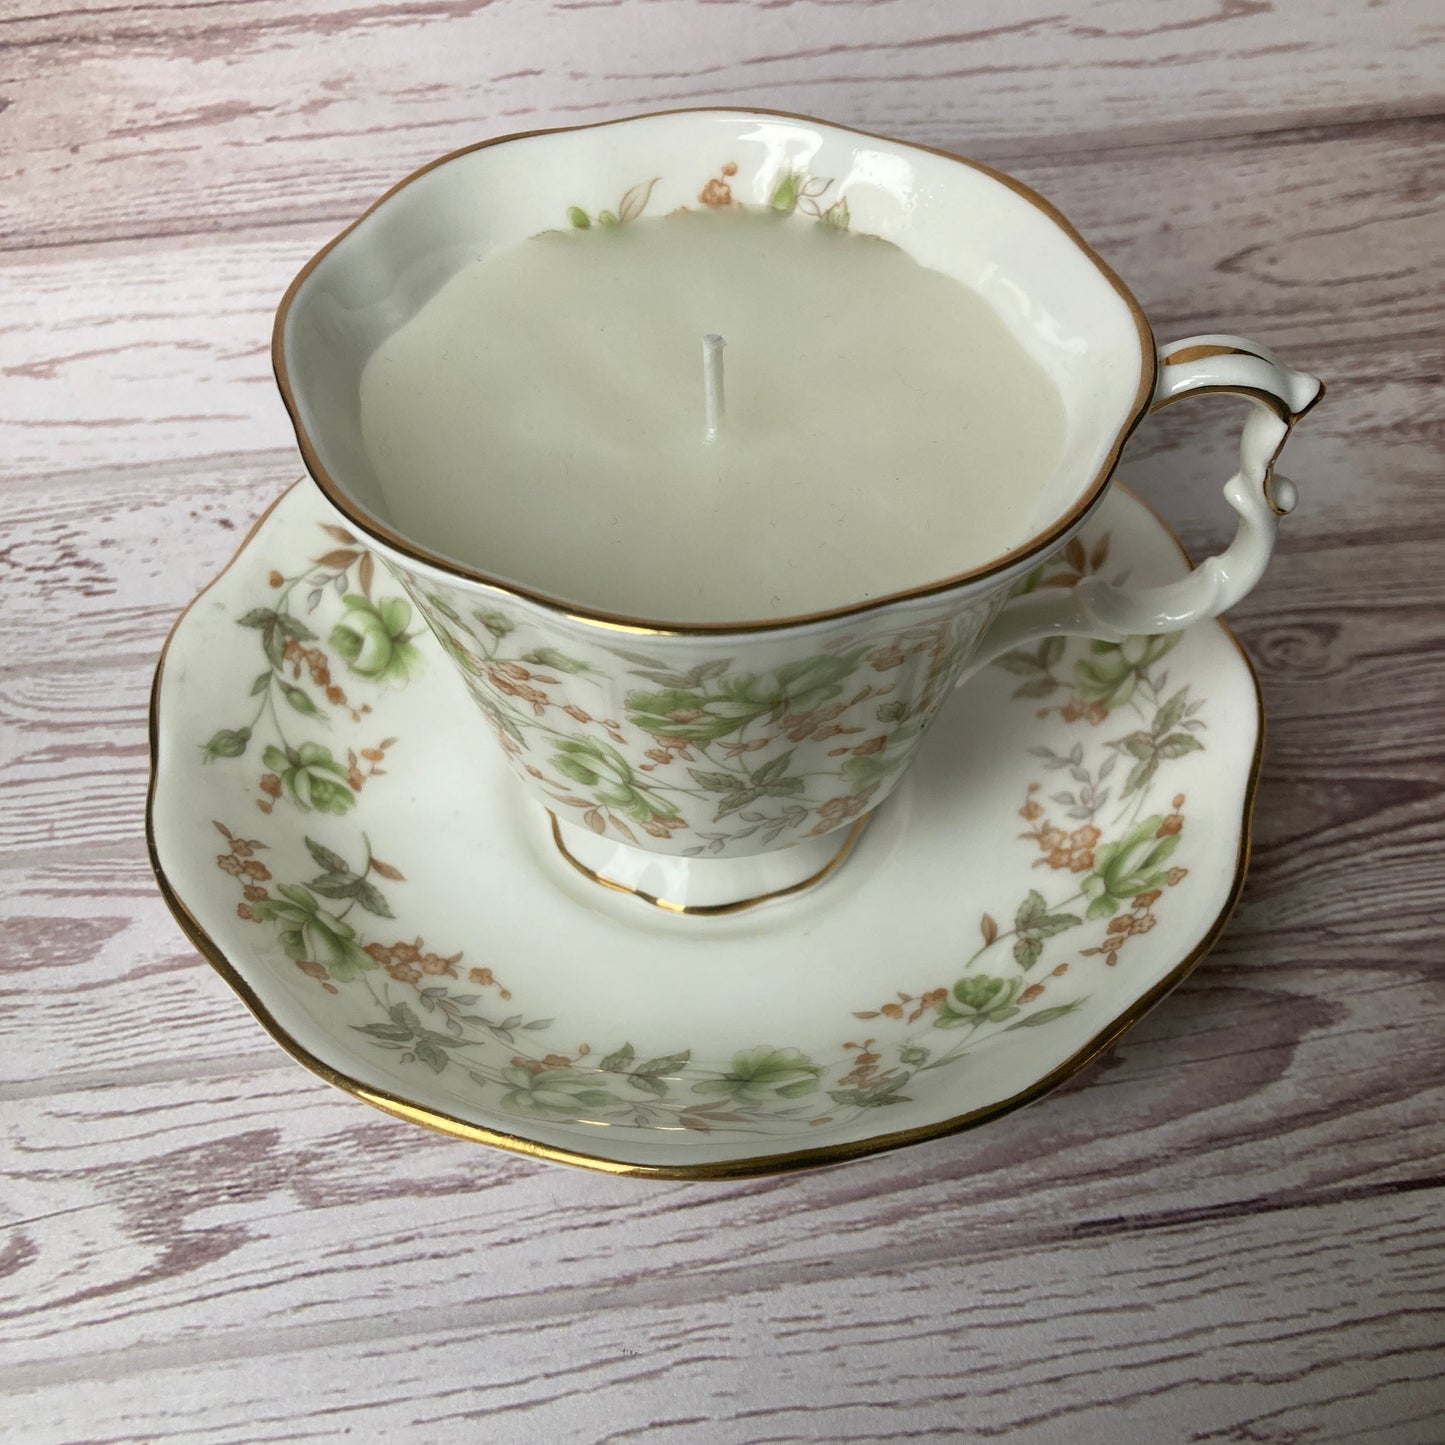 Teacup Candle - Rosemary Sage